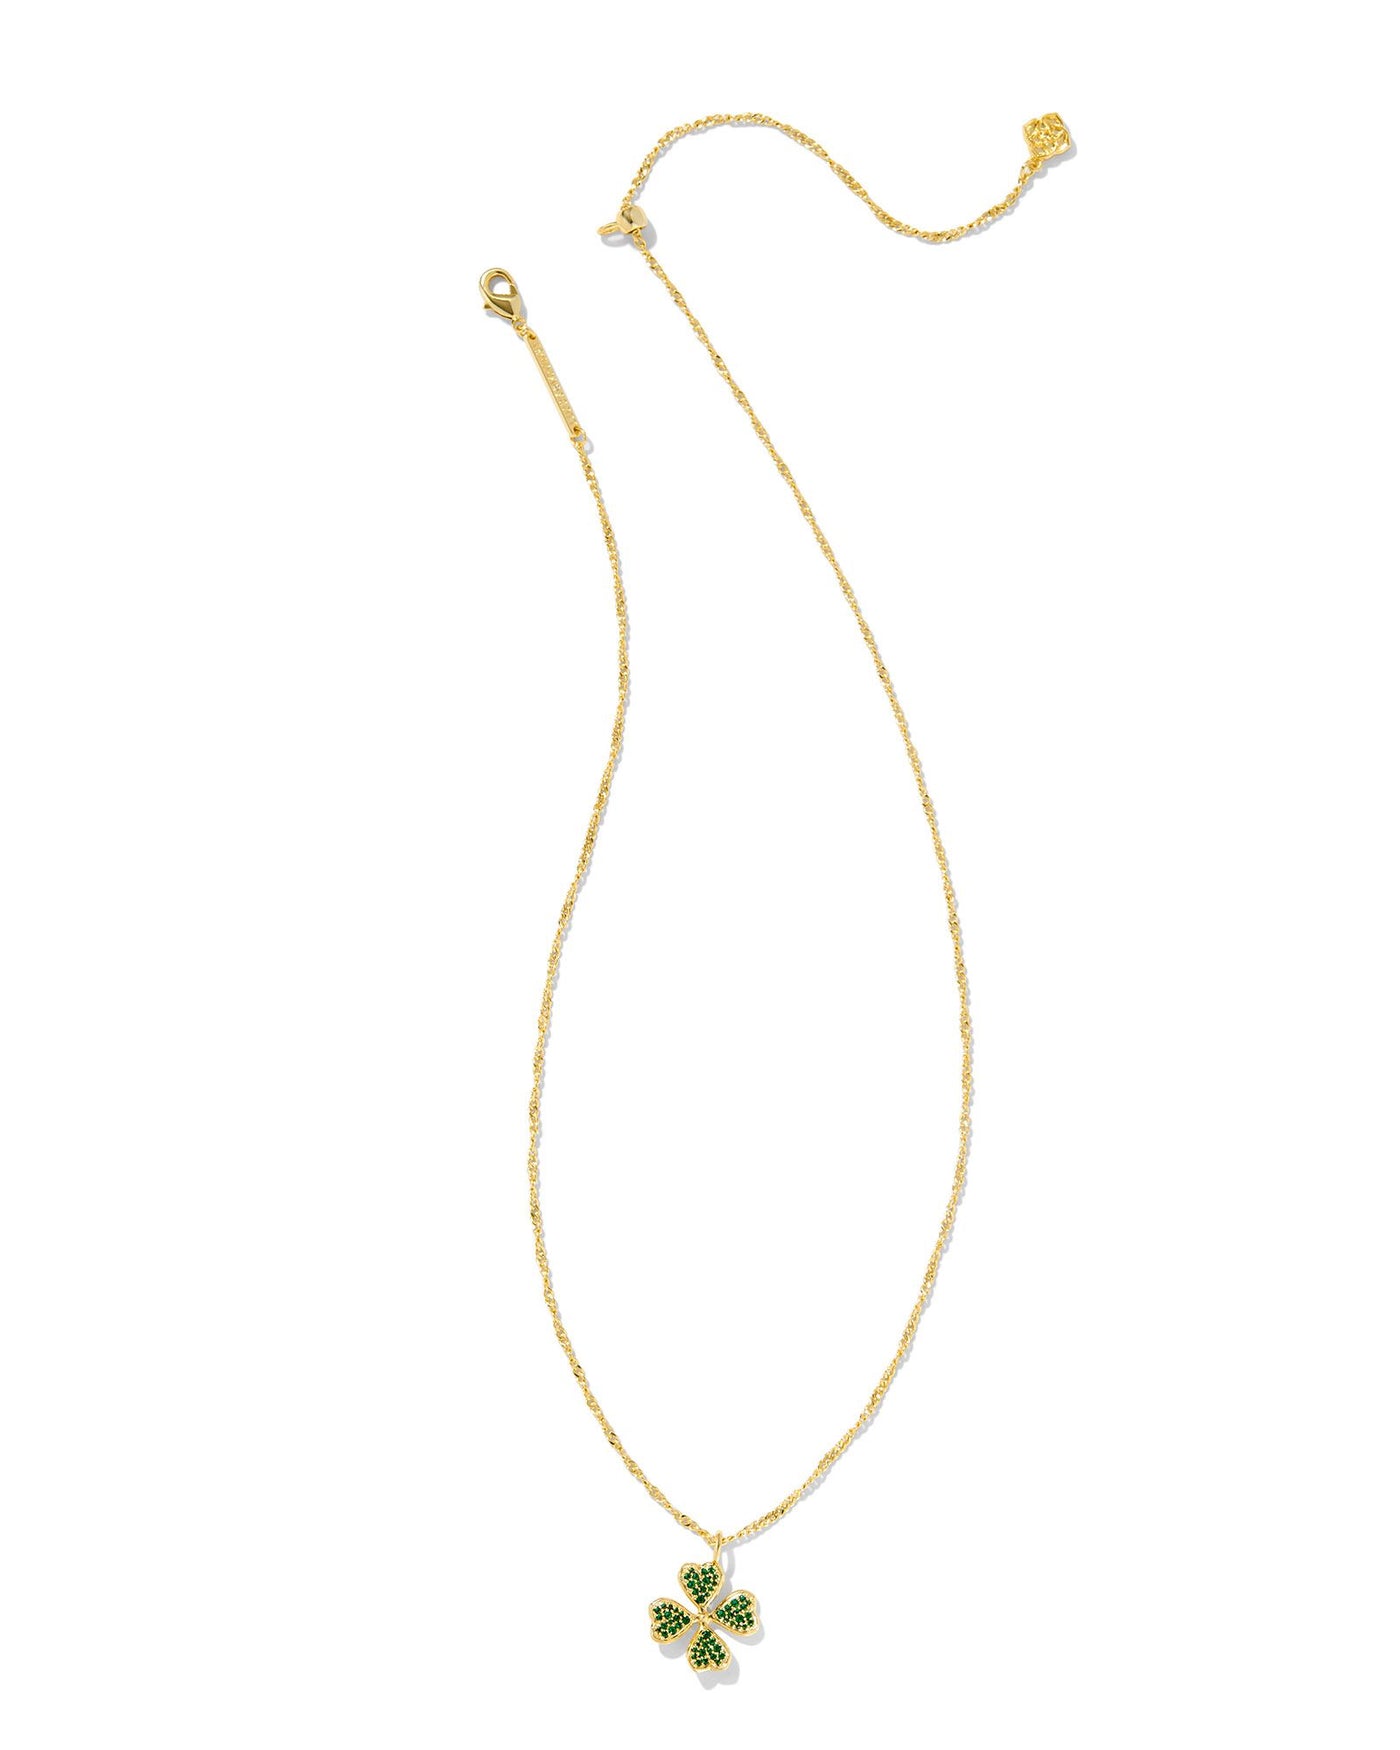 Kendra Scott Clover Crystal Necklace in Gold Green Crystal